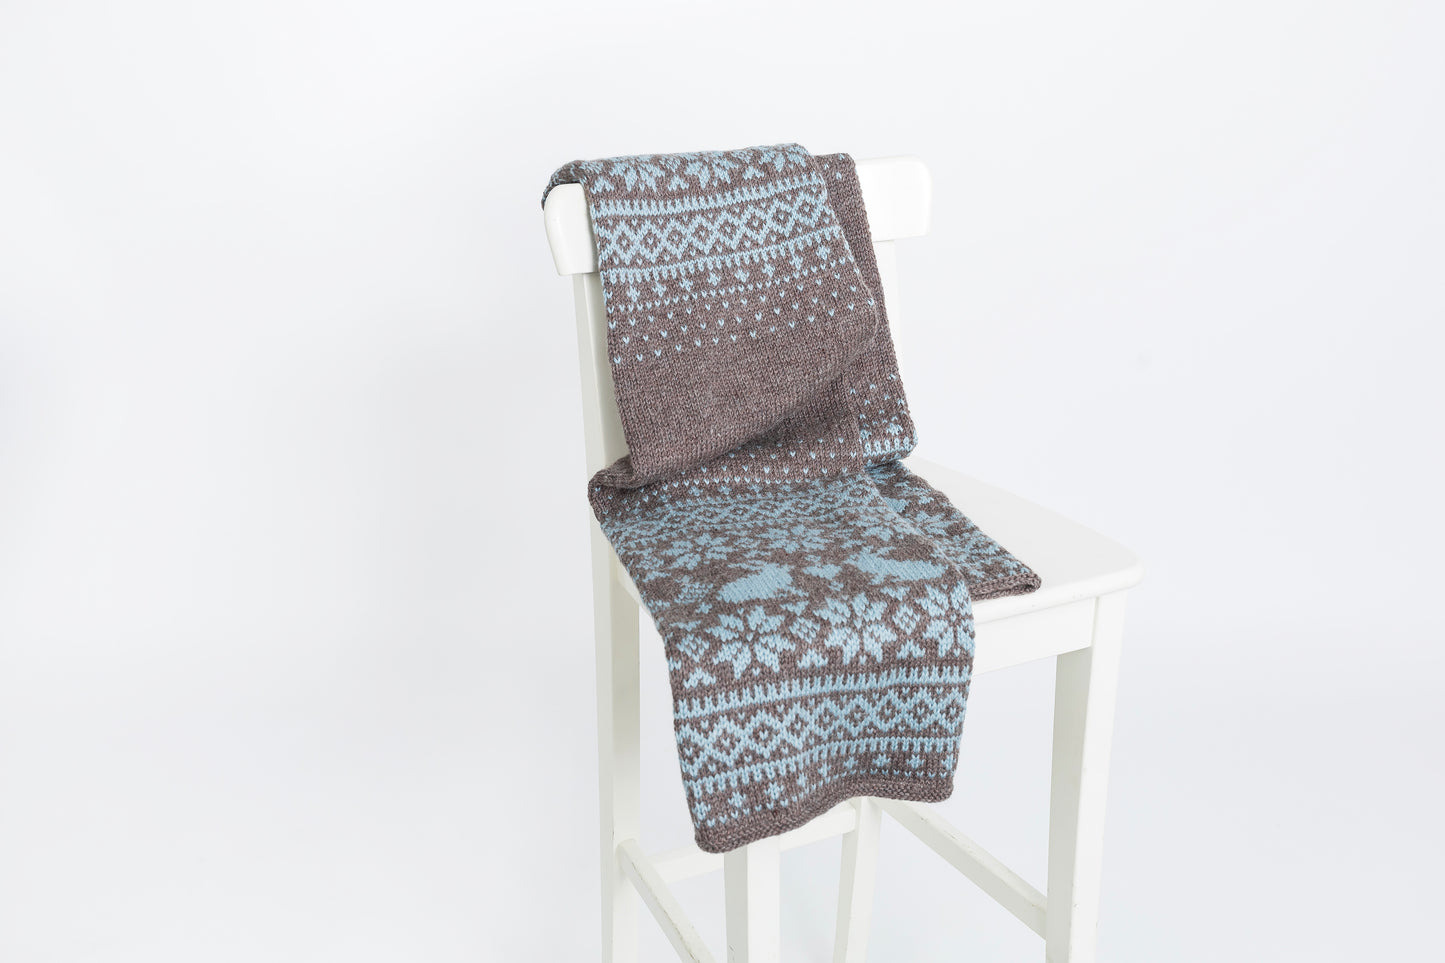 Brown and blue wool long hand-knitted Fair Isle scarf in Bunny Rabbits knitting pattern on a chair